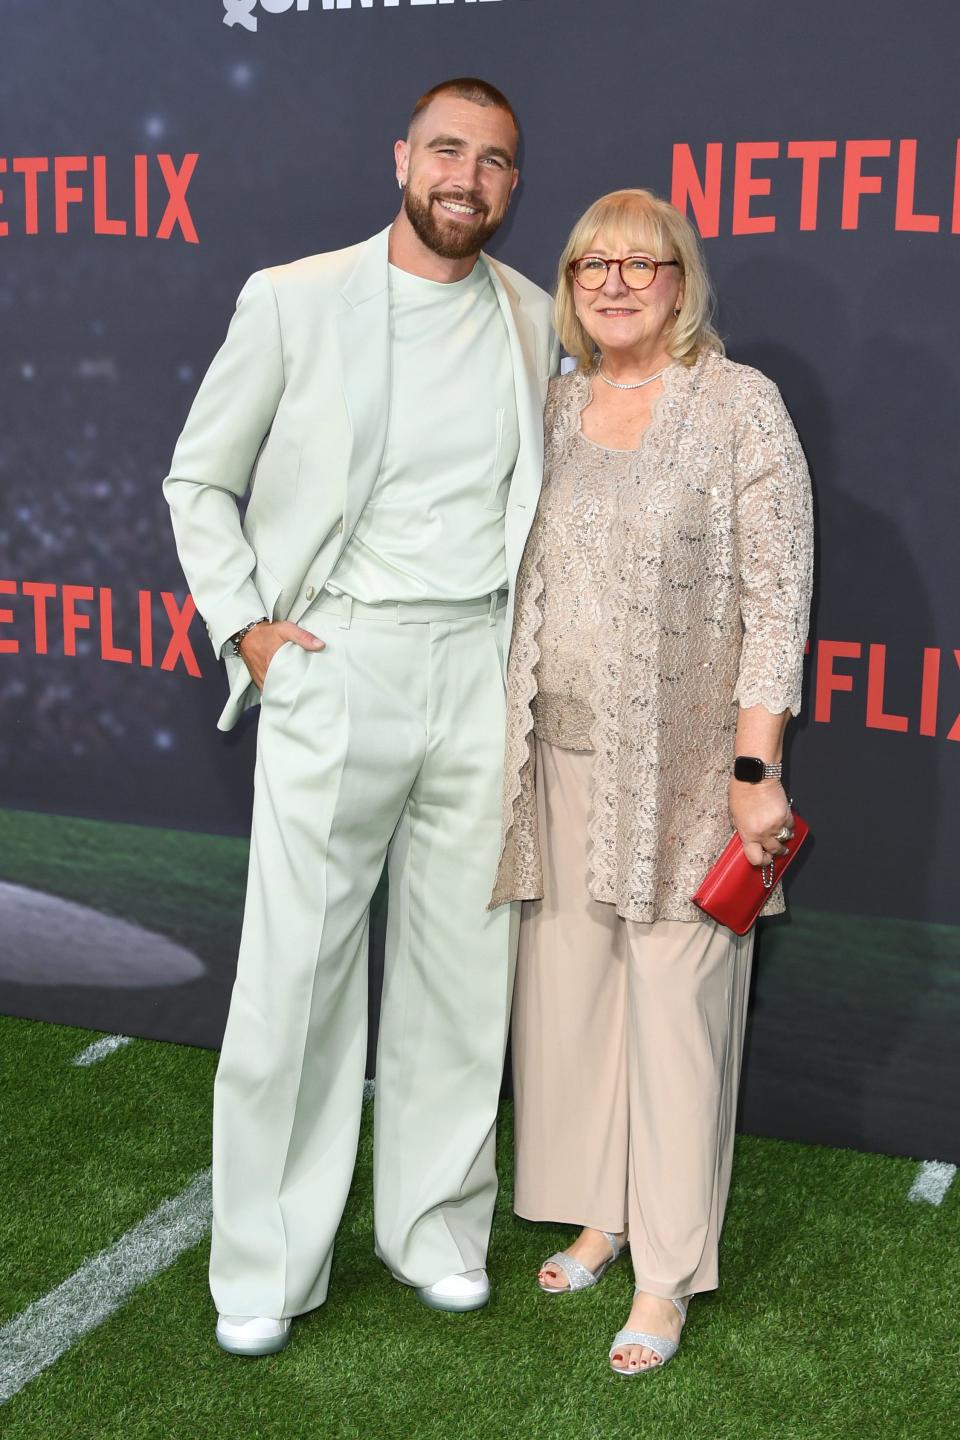 Travis Kelce wearing a mint green suit next to his mother Donna Kelce, who is wearing a beige outfit.